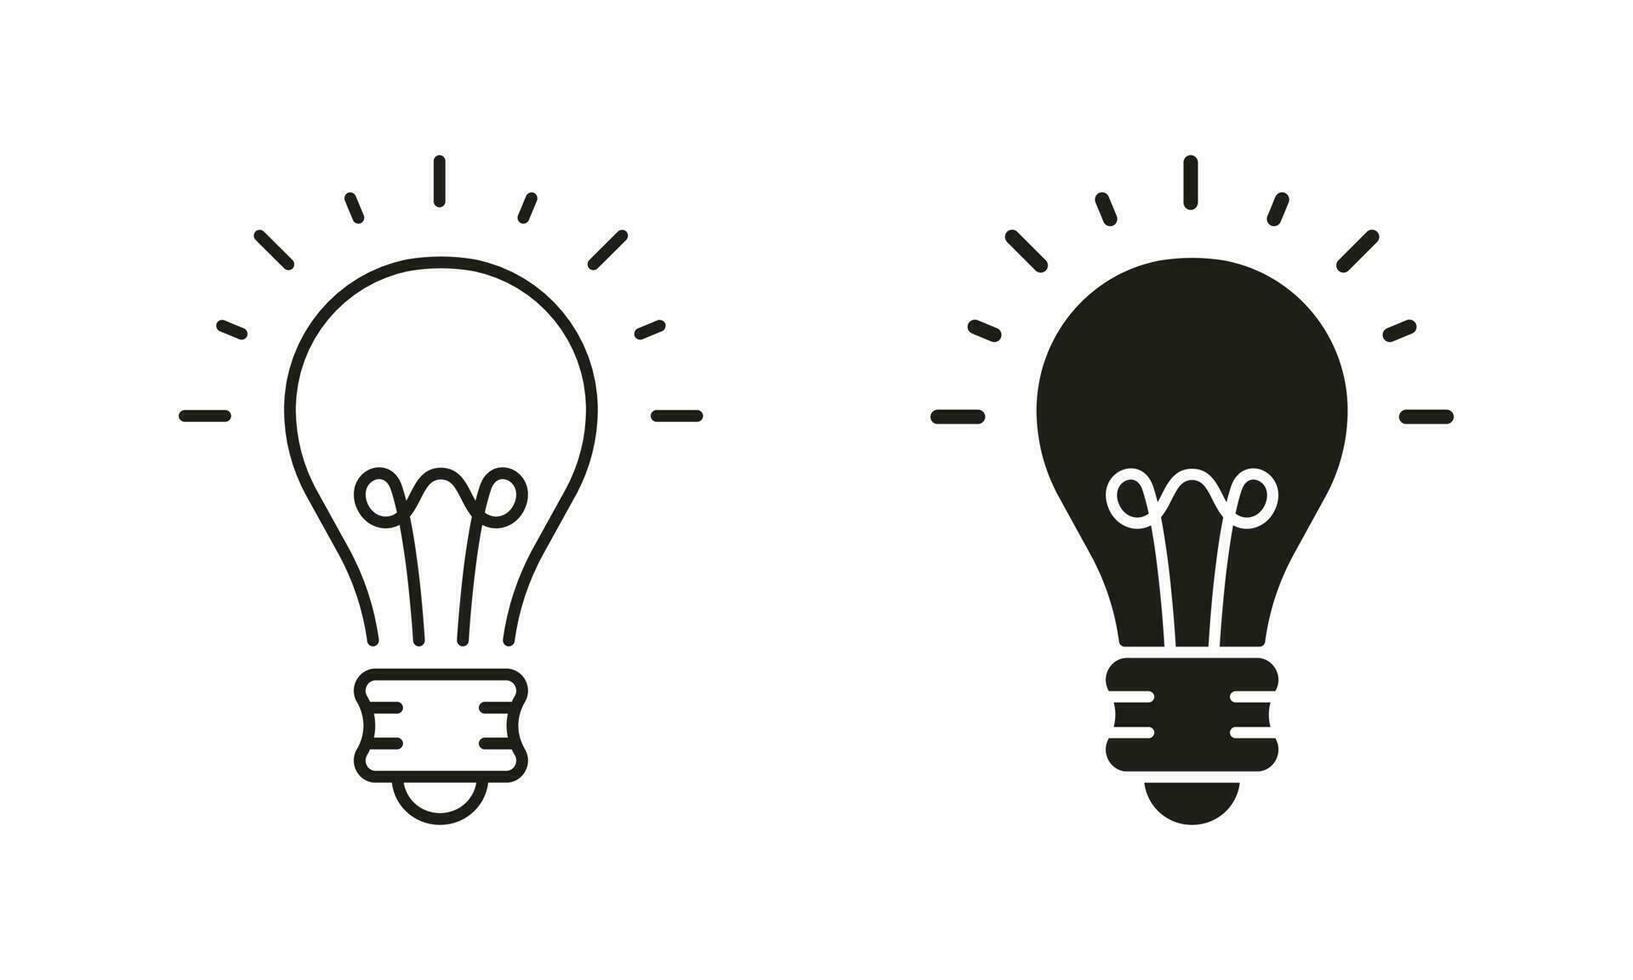 Lightbulb Idea Concept Line and Silhouette Icon Set. Creative Solution, Innovation Sign. Bright Light Bulb Pictogram. Low Energy Lightbulb Symbols on White Background. Isolated Vector Illustration.